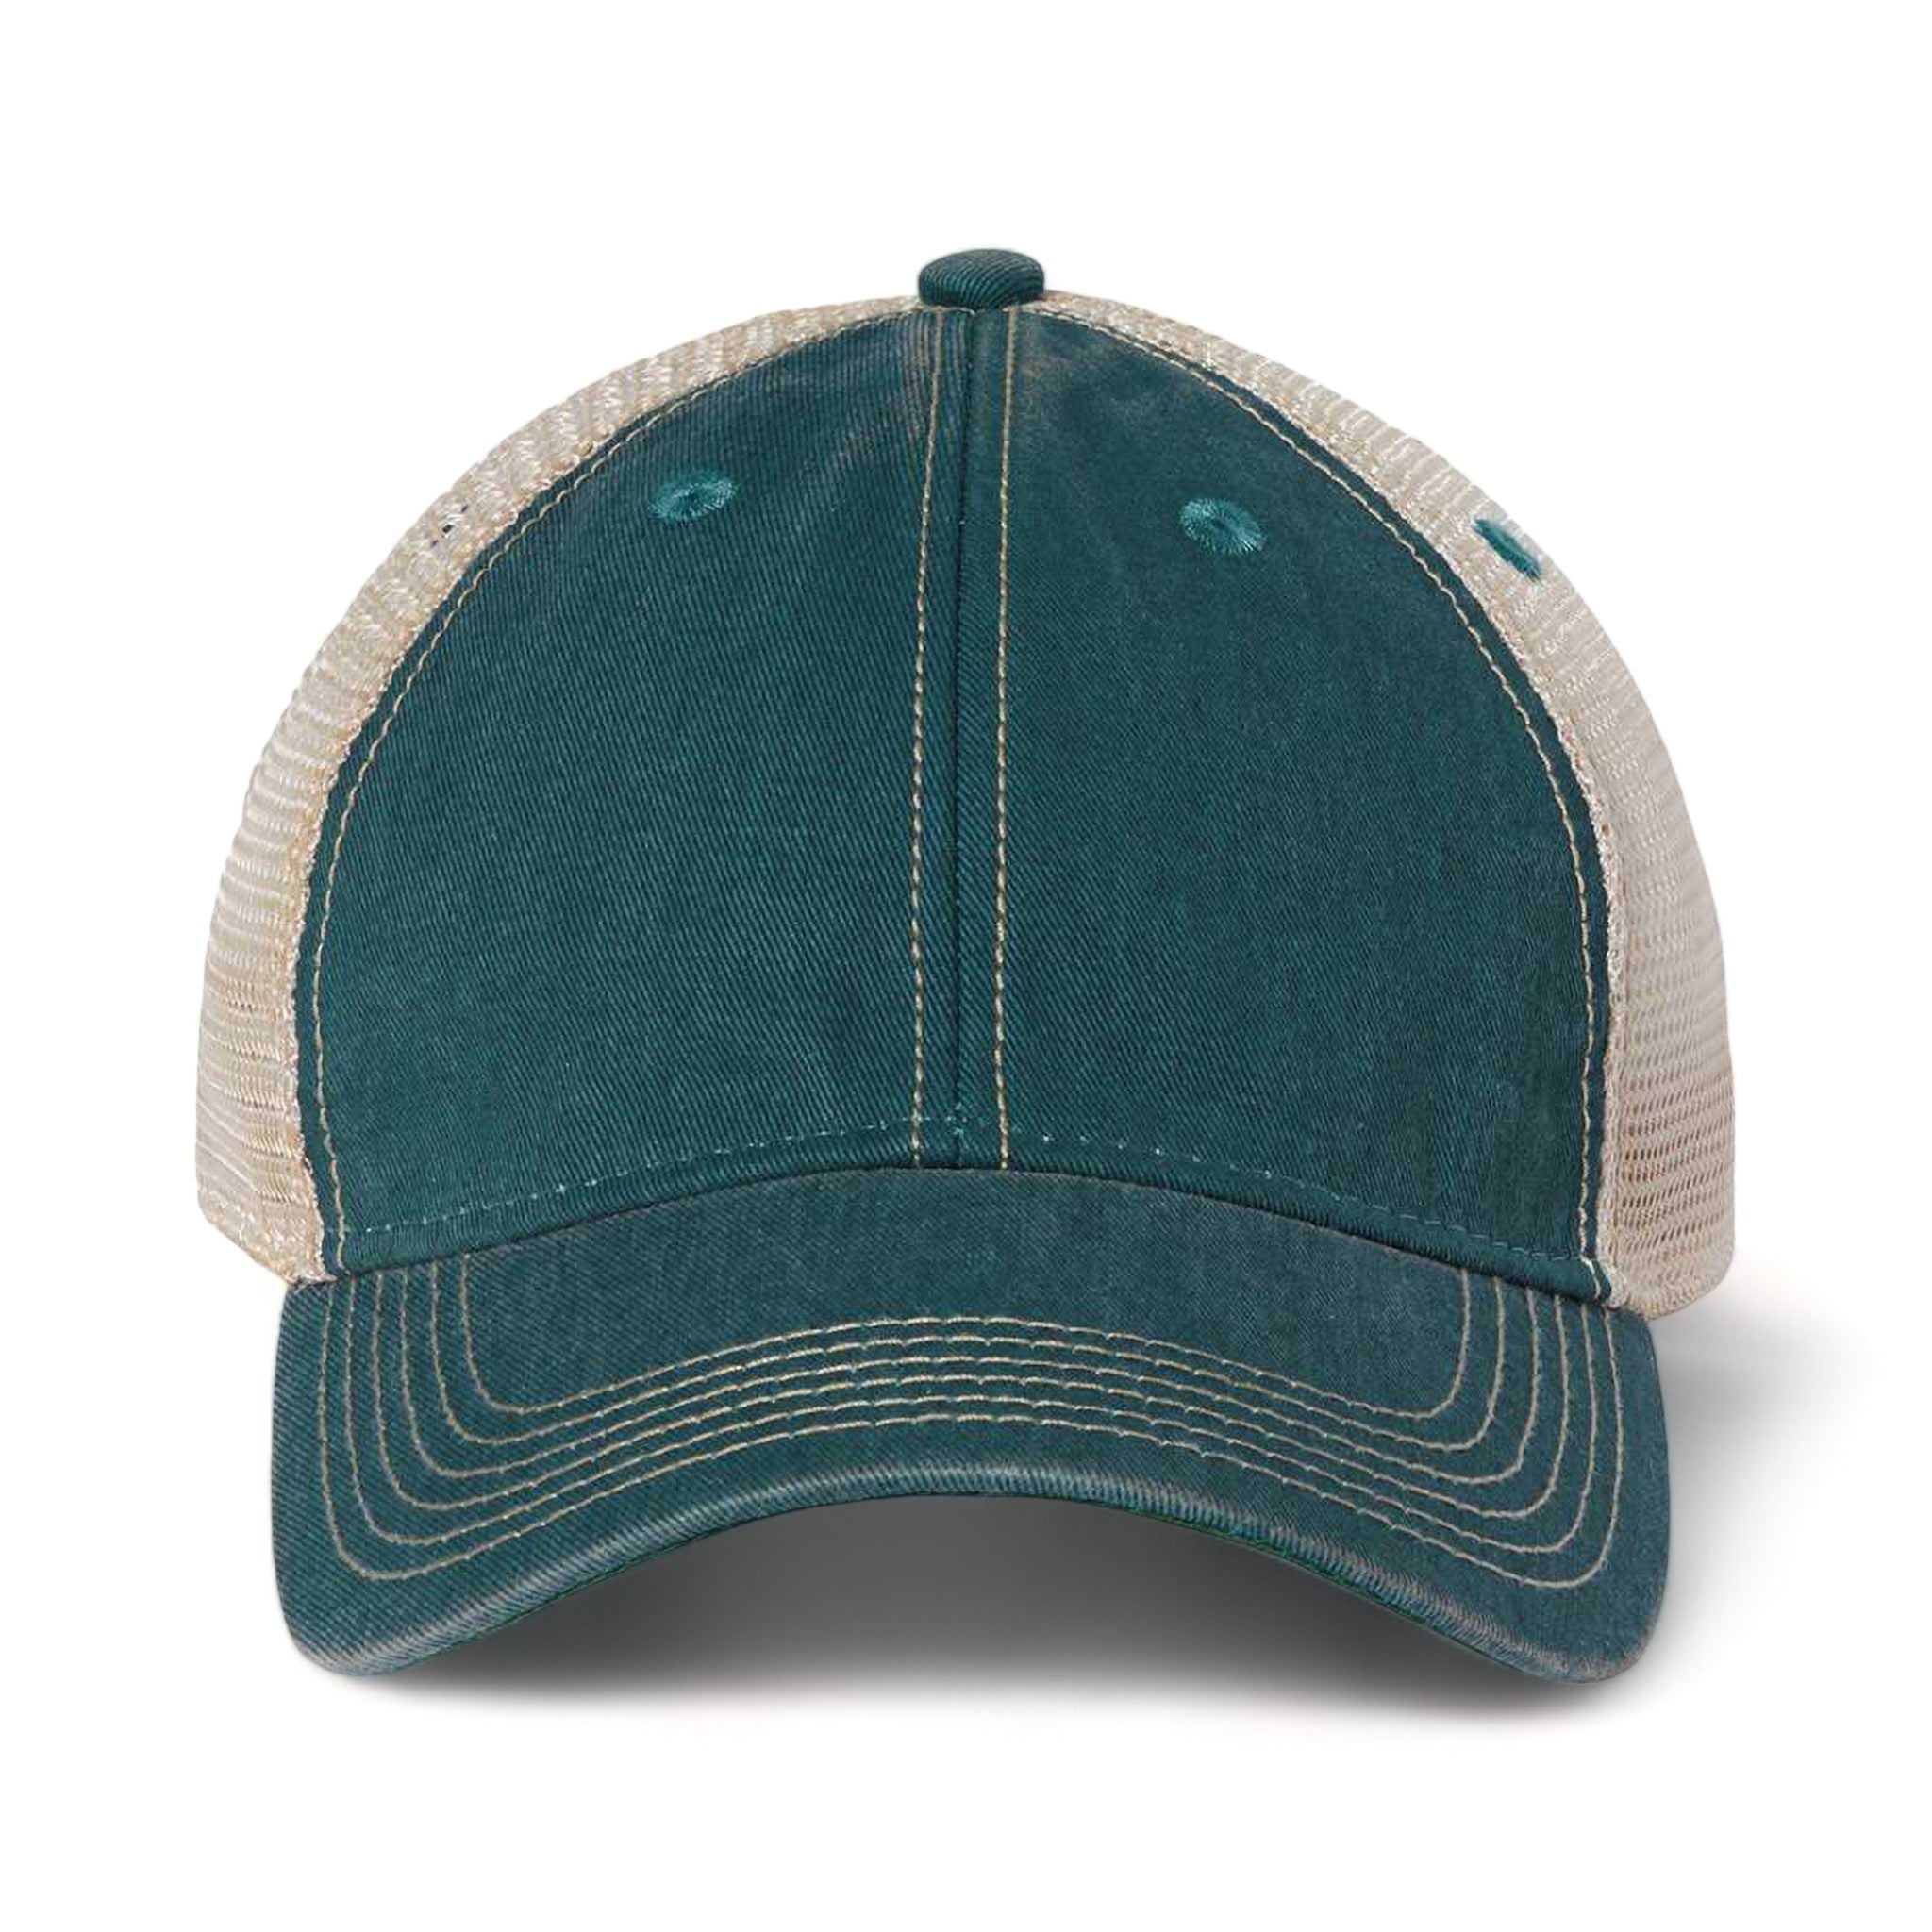 Front view of LEGACY OFA custom hat in marine blue and khaki